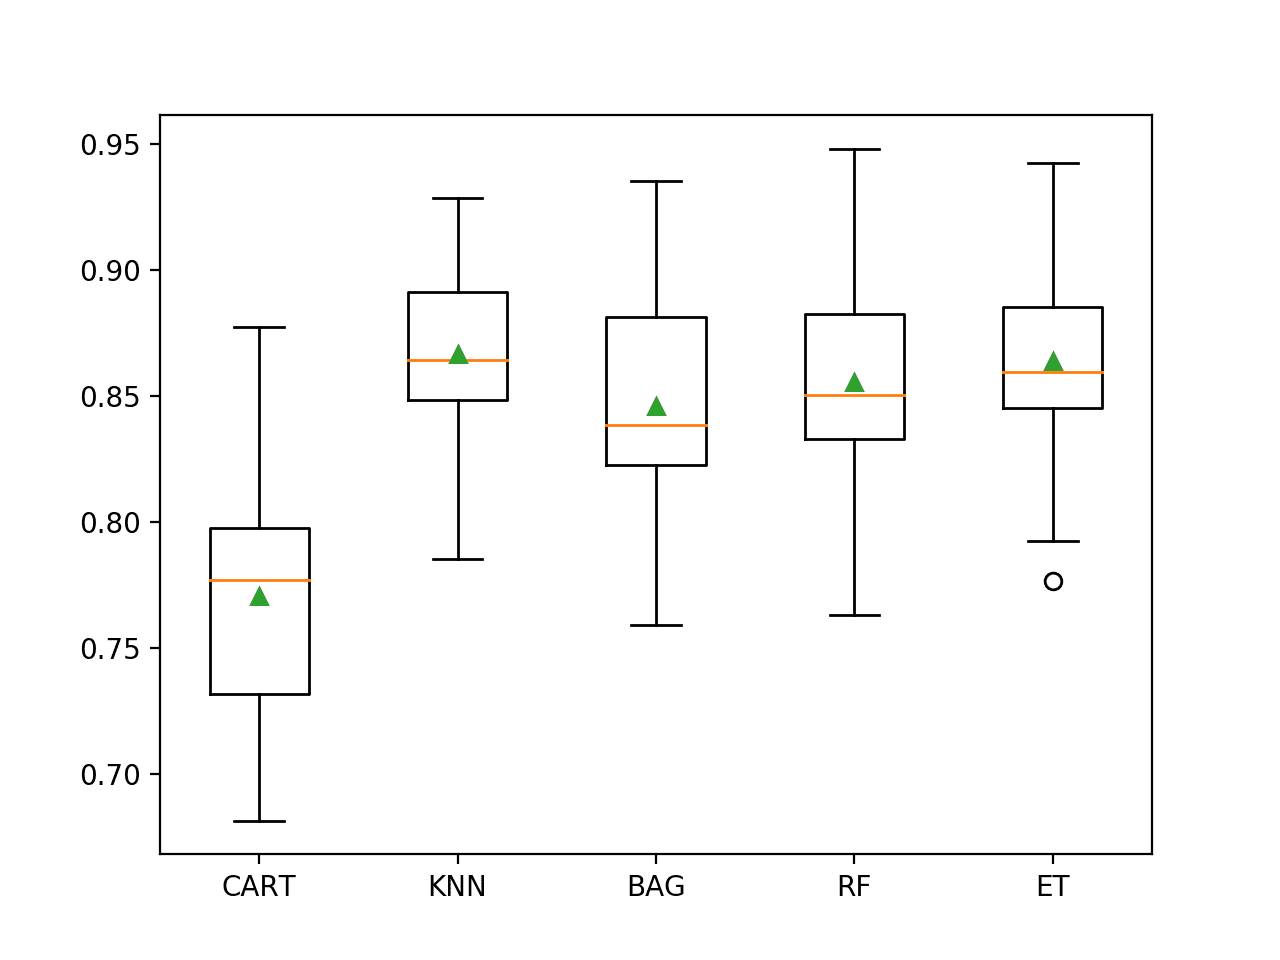 Box and Whisker Plot of Machine Learning Models on the Imbalanced Credit Card Fraud Dataset